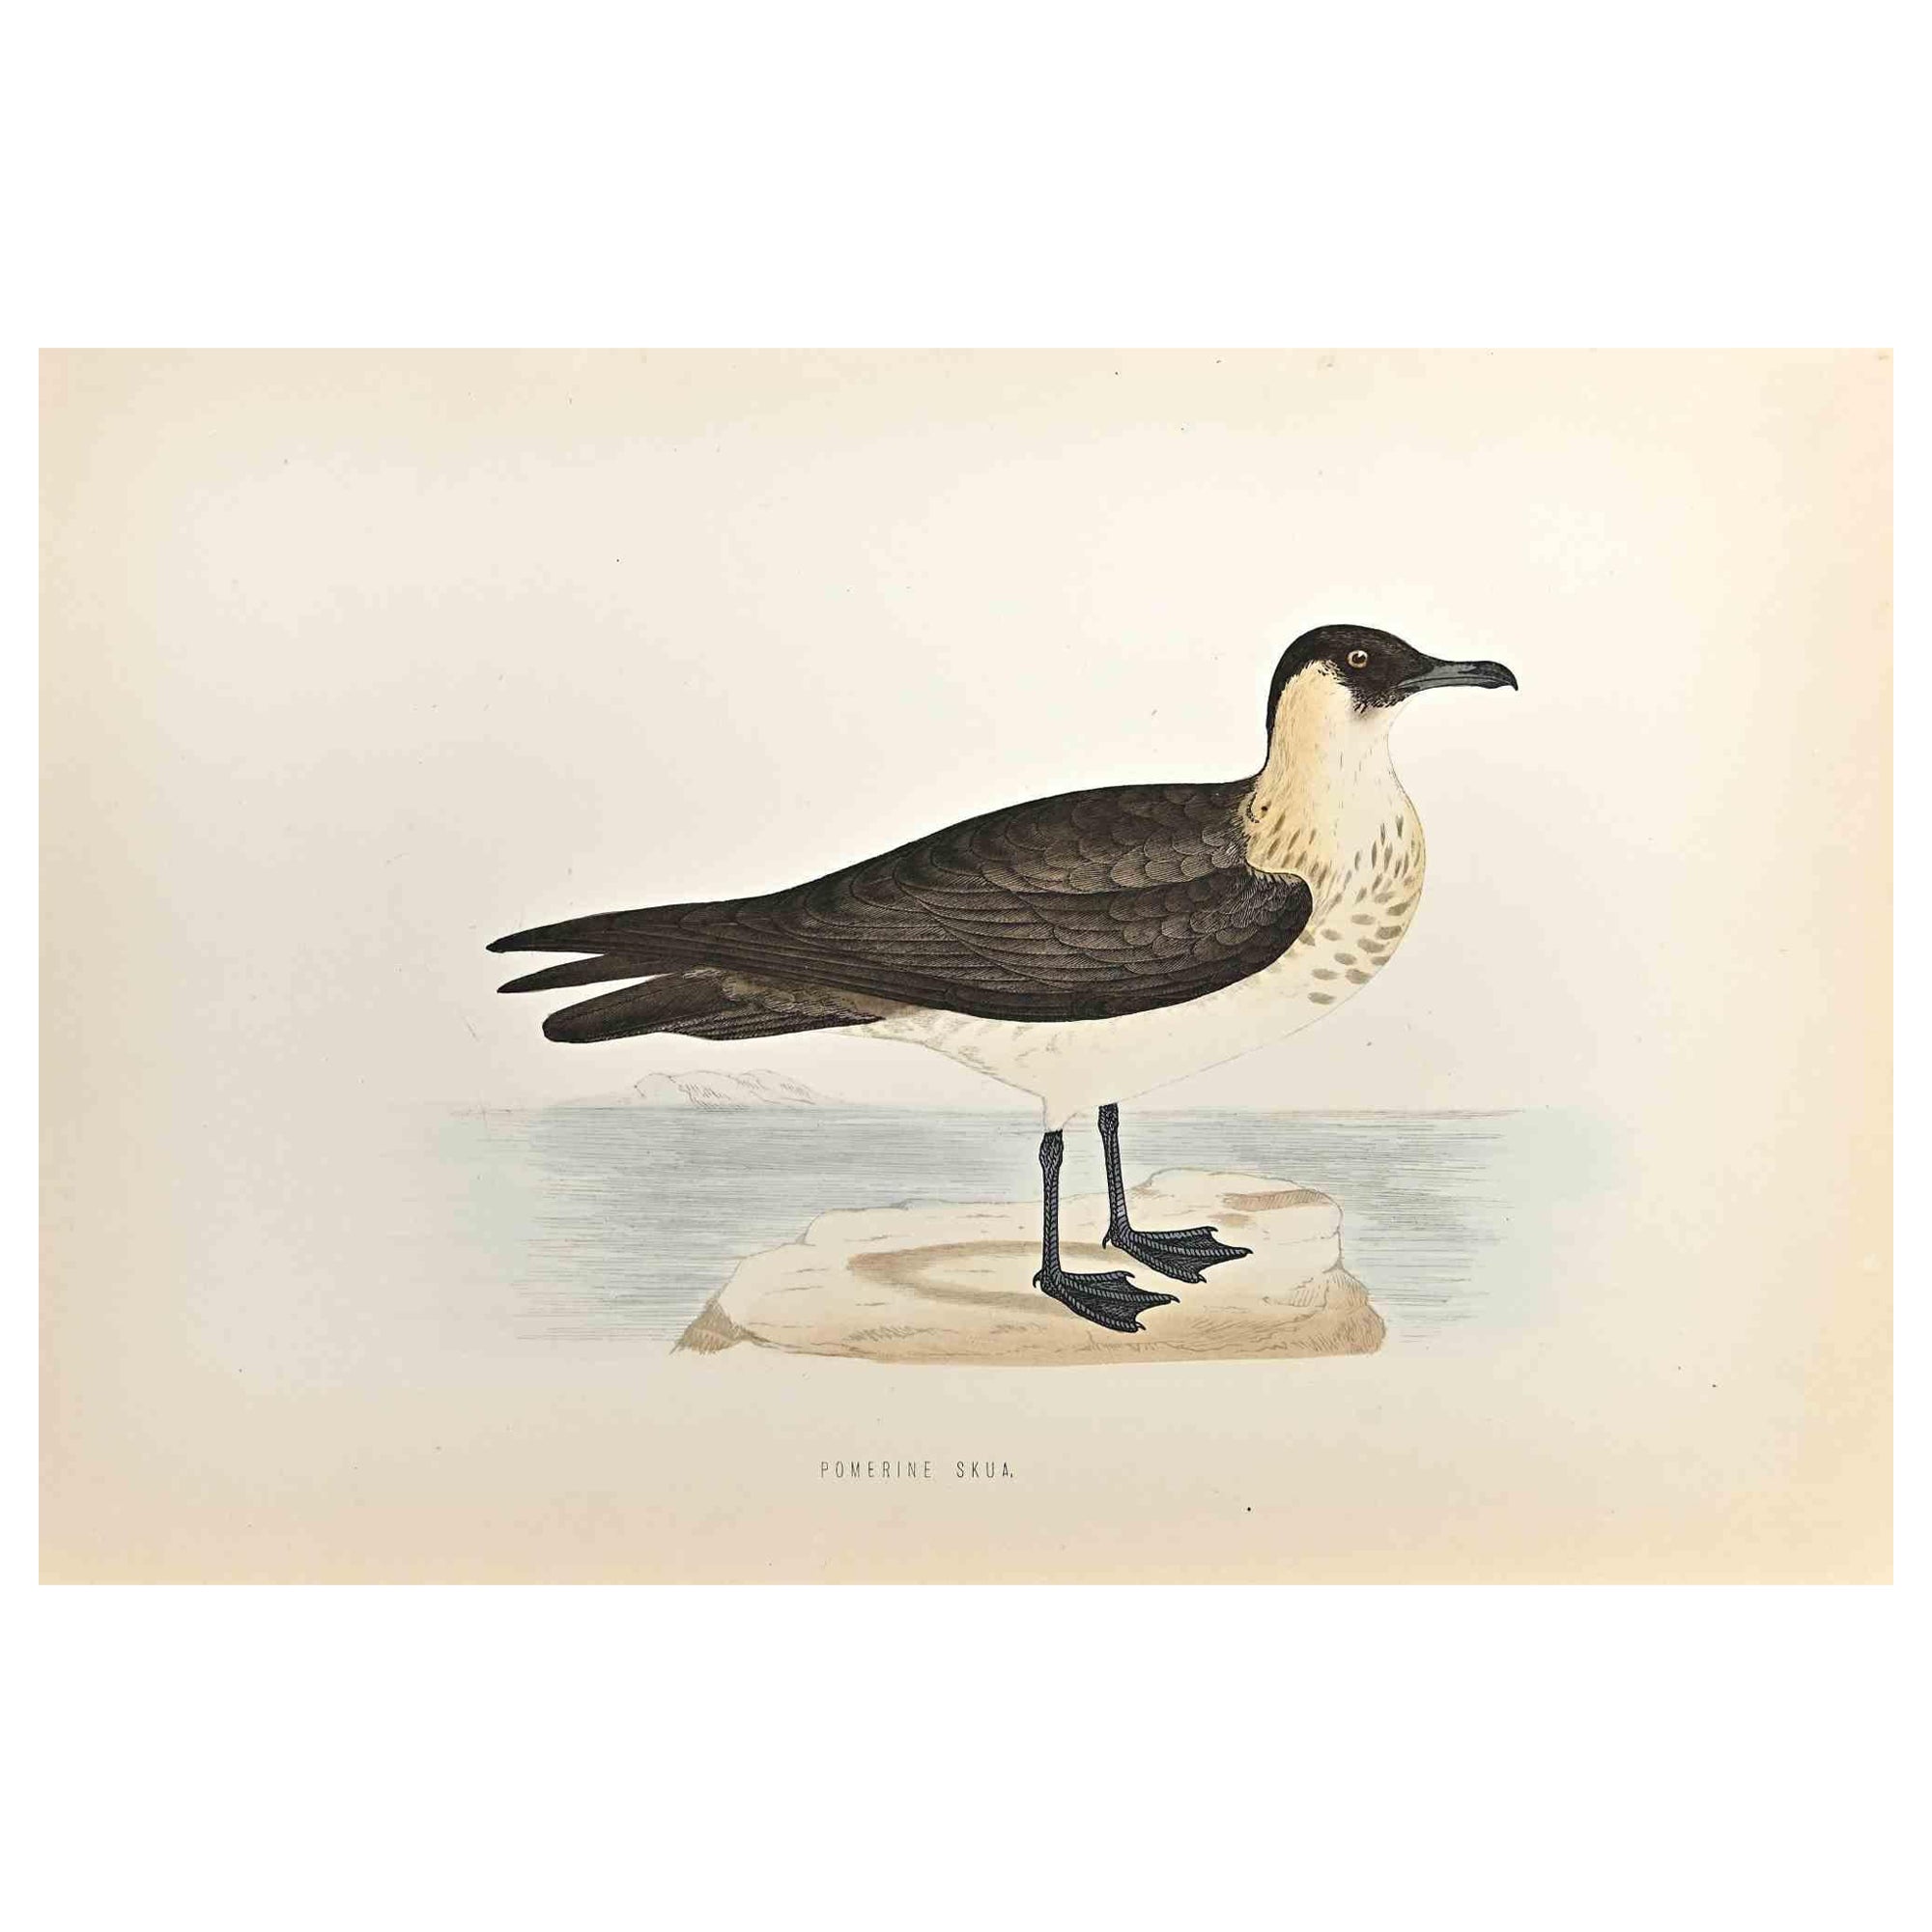 Pomerine Skua is  a modern artwork realized in 1870 by the British artist Alexander Francis Lydon (1836-1917) . 

Woodcut print, hand colored, published by London, Bell & Sons, 1870.  Name of the bird printed in plate. This work is part of a print